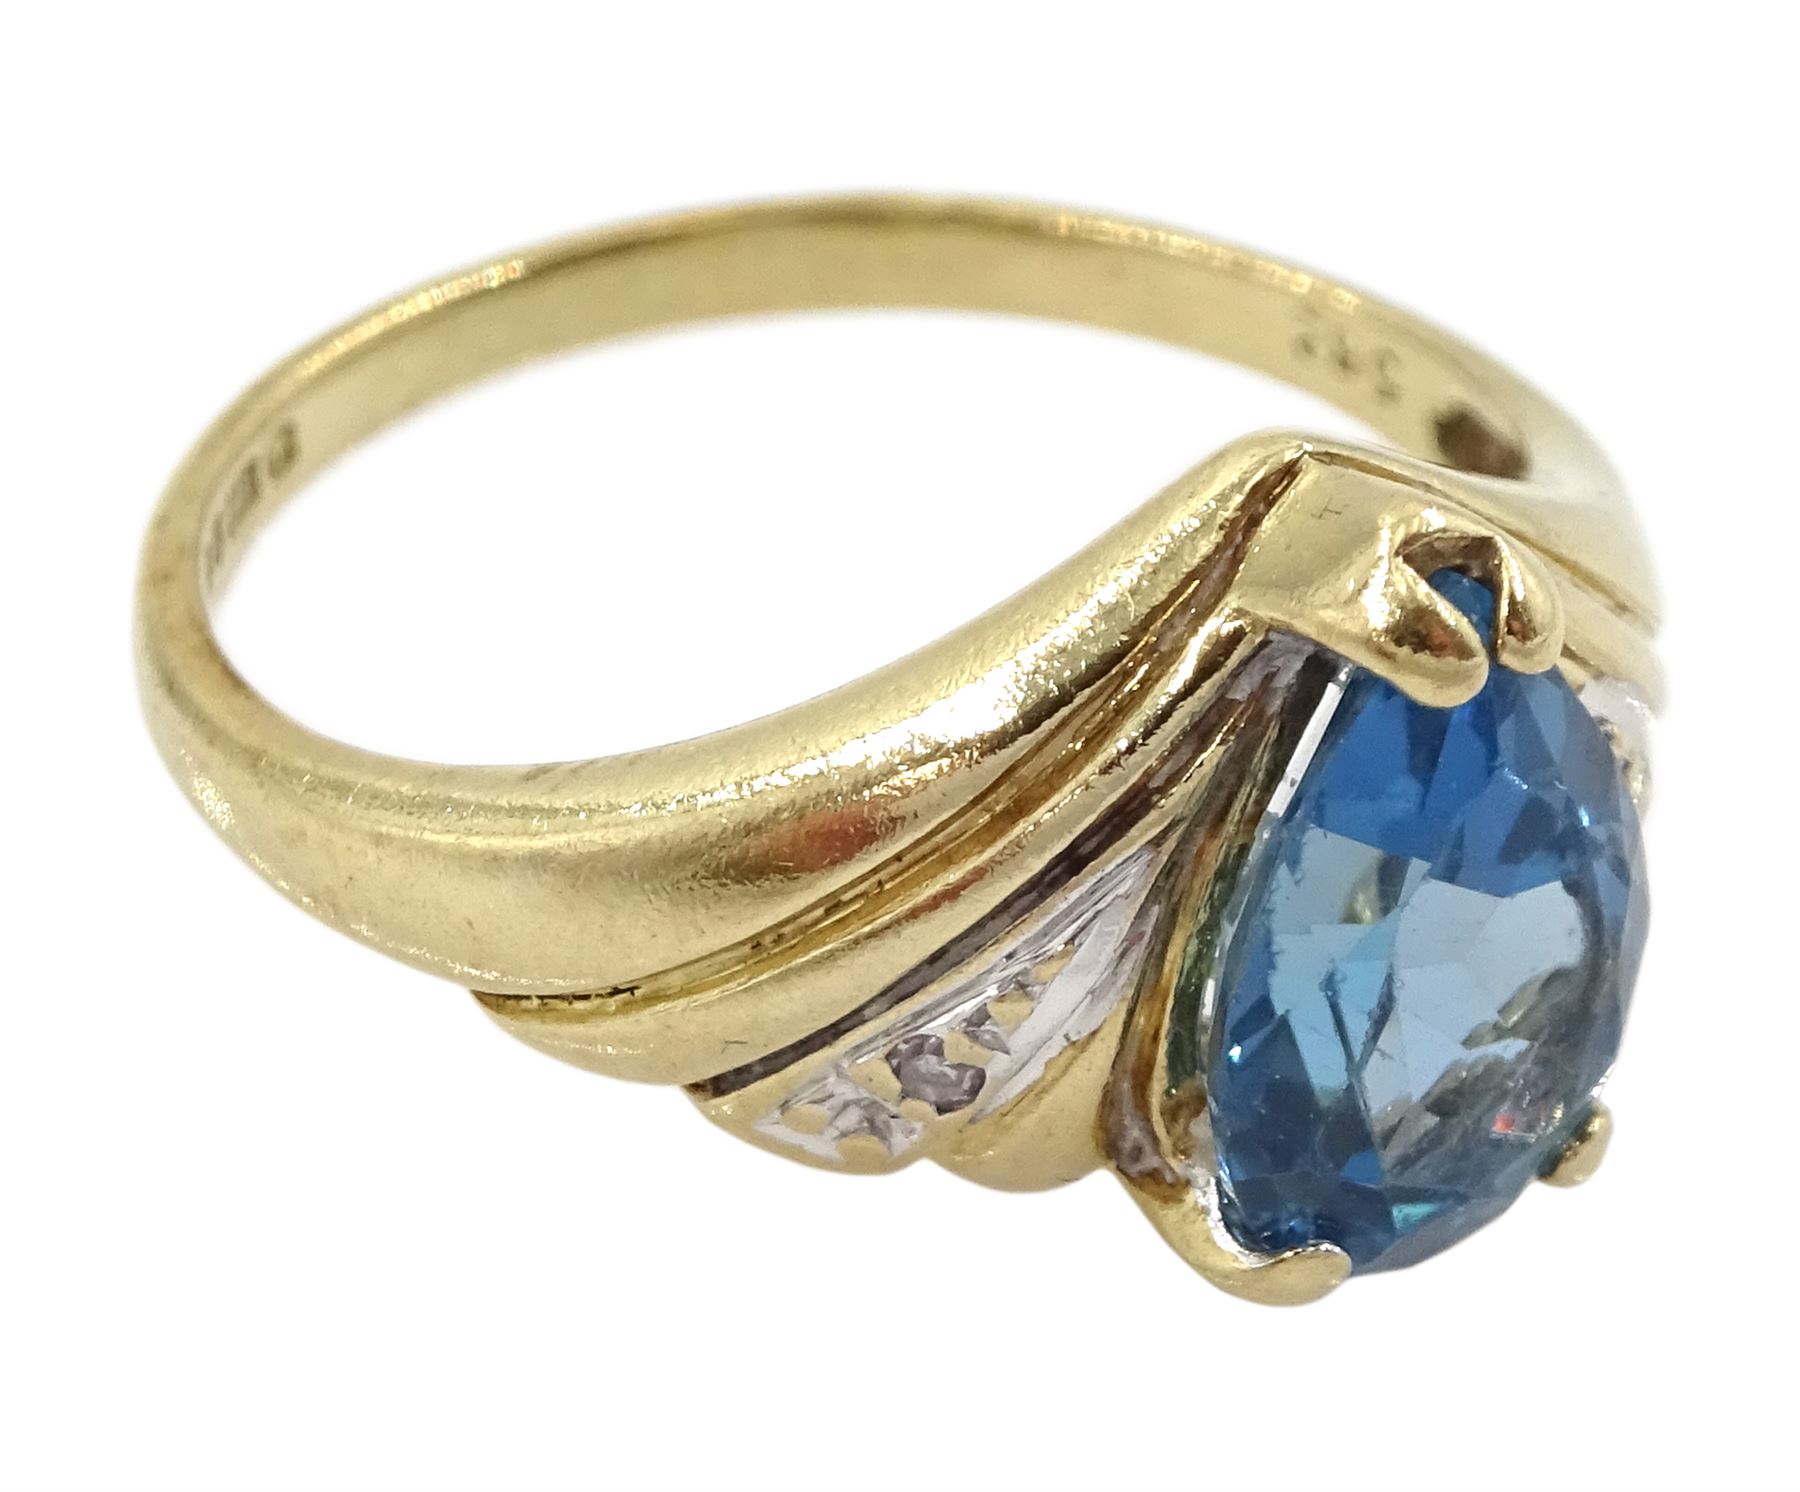 9ct gold pear cut London blue topaz ring - Image 3 of 4